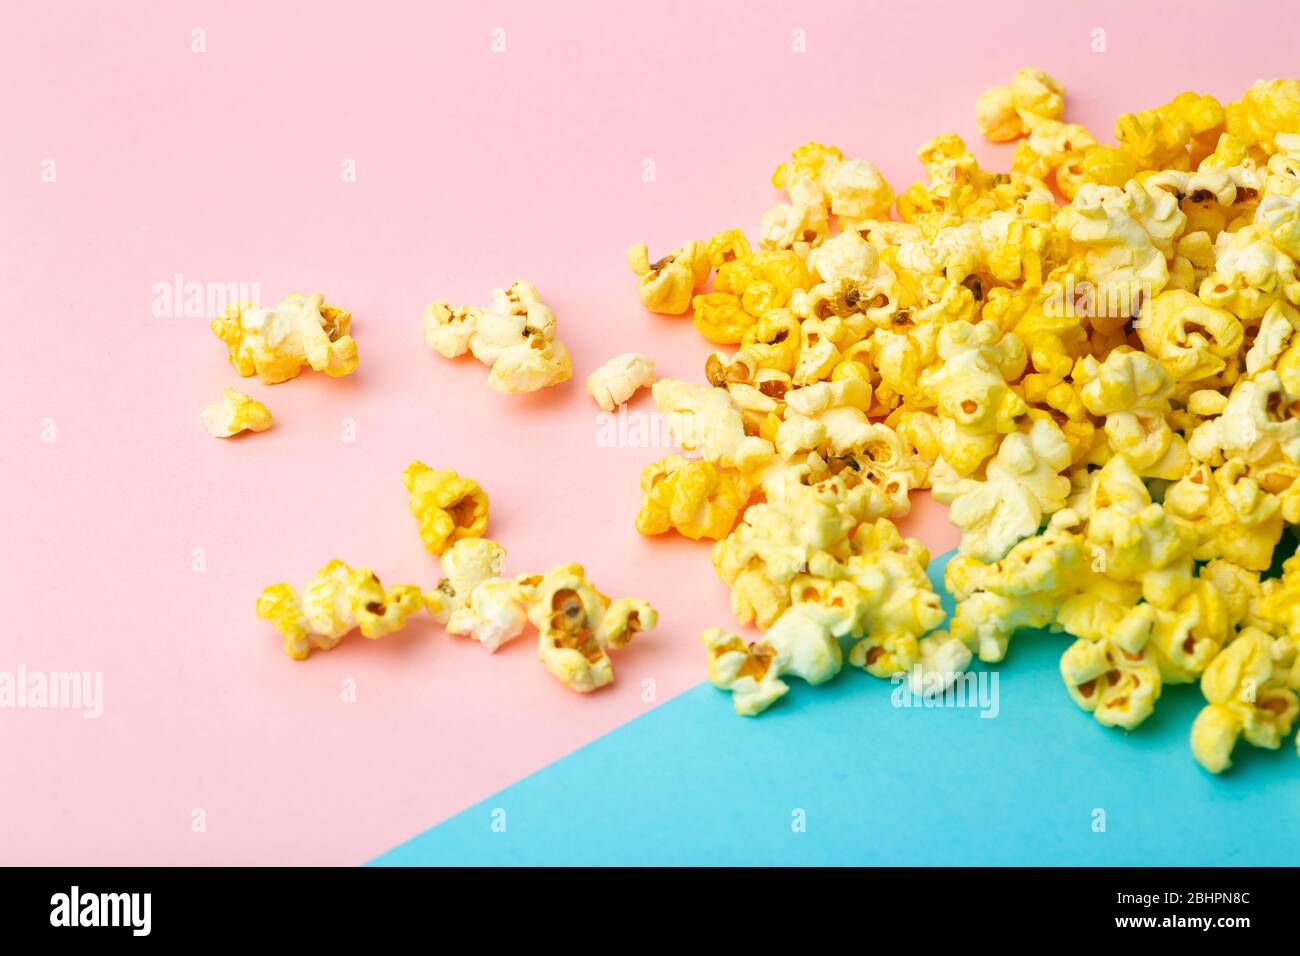 Popcorn on a colored background. Minimal food concept. Entertainment, film and video content. Aesthetics 80s and 90s concept Stock Photo